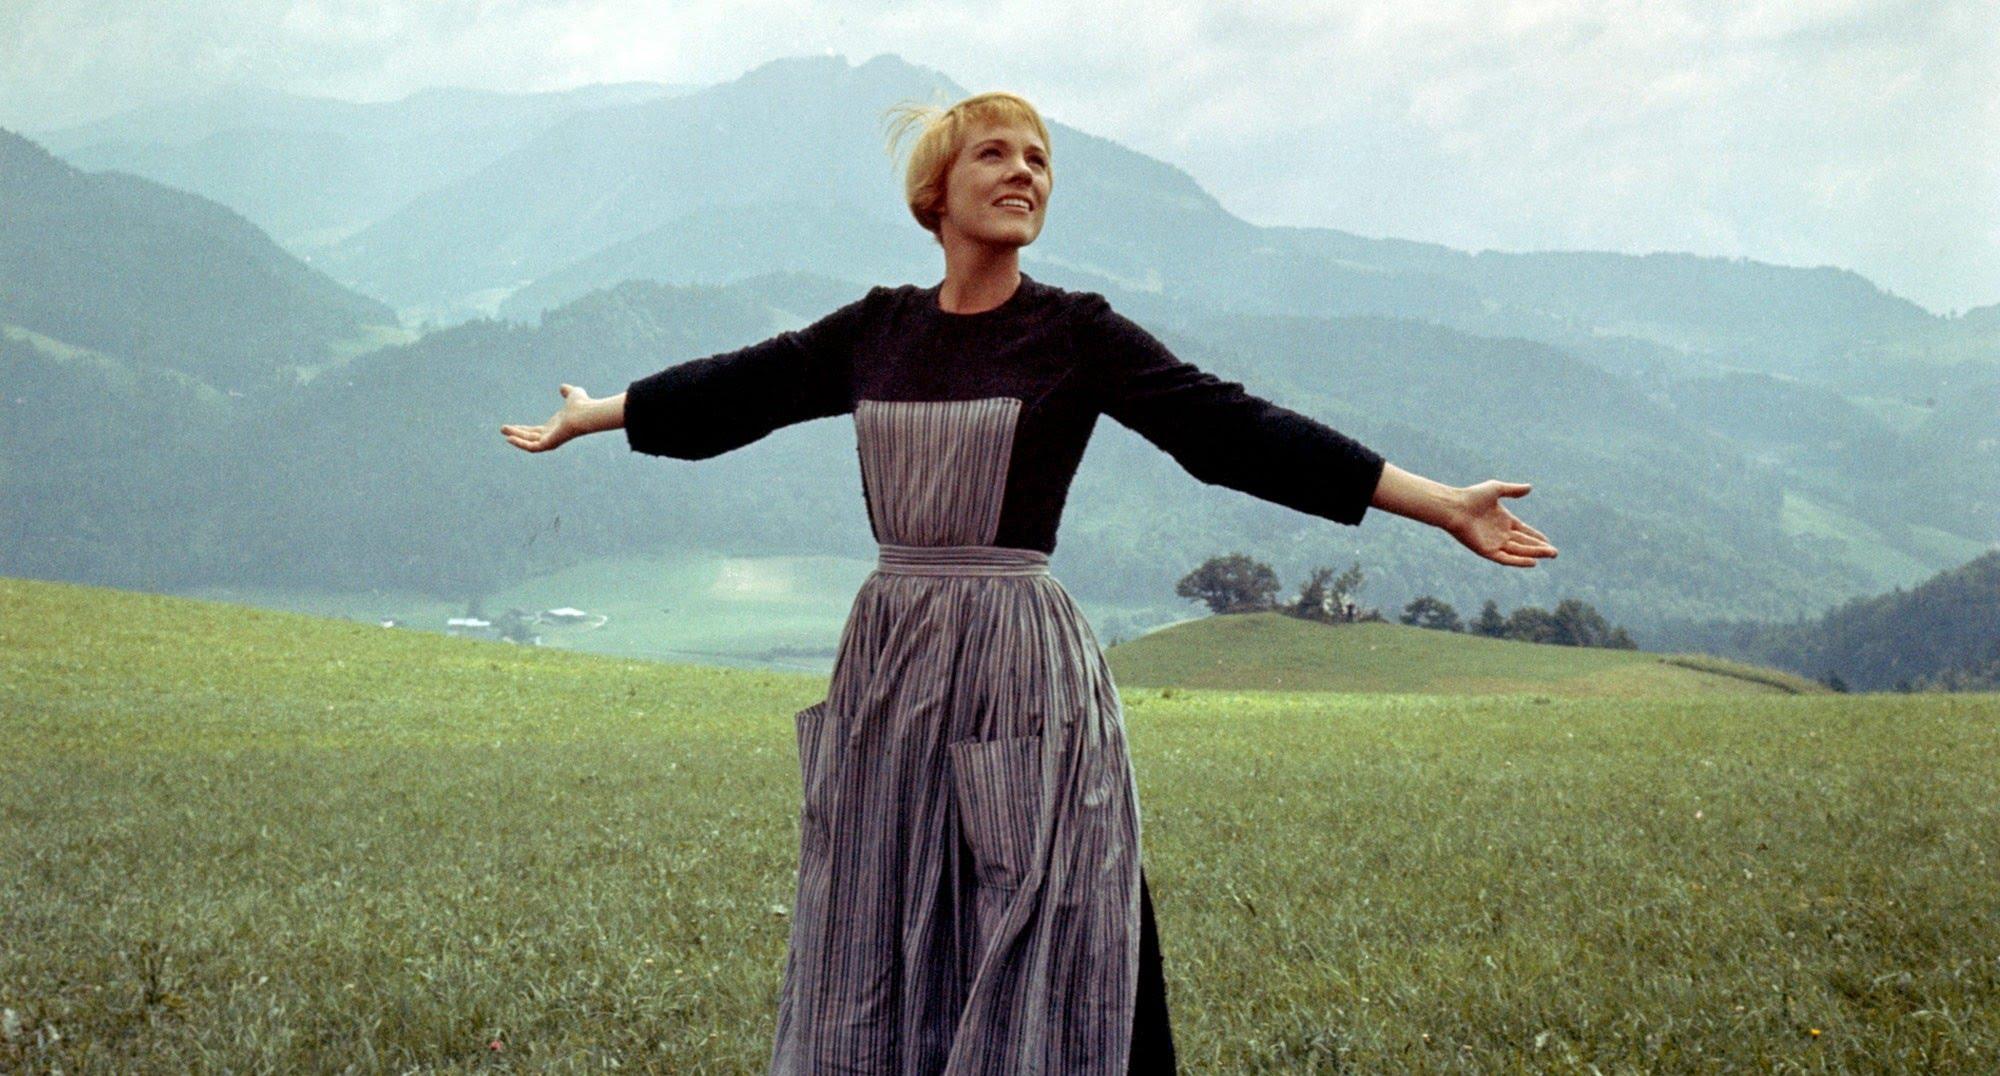 A woman stands on a grassy hill with the Alps in the background, arms raised as if she's just finished singing.